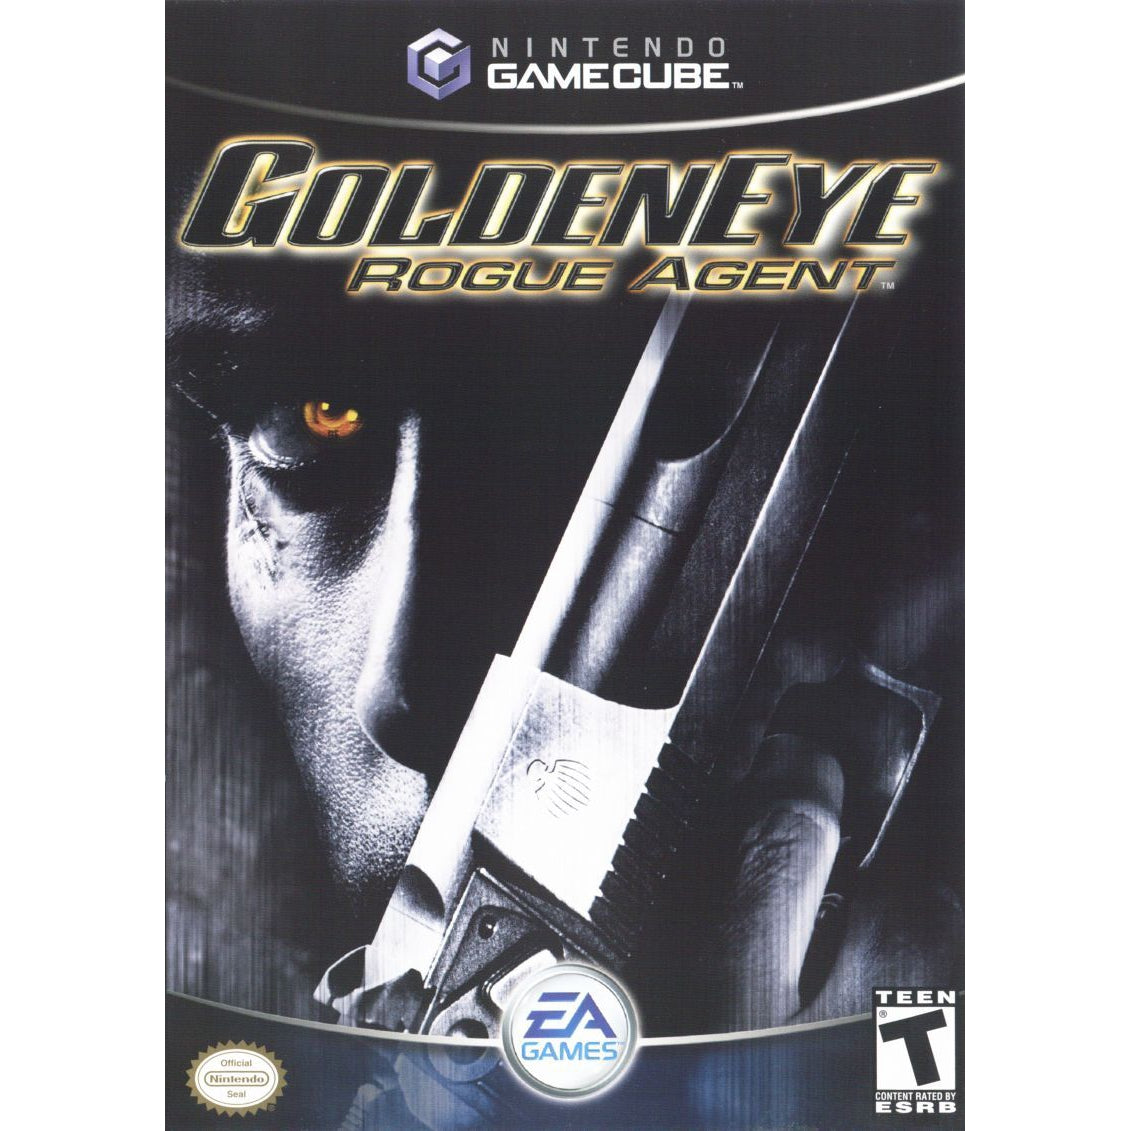 GoldenEye: Rogue Agent - Nintendo GameCube Game Complete - YourGamingShop.com - Buy, Sell, Trade Video Games Online. 120 Day Warranty. Satisfaction Guaranteed.